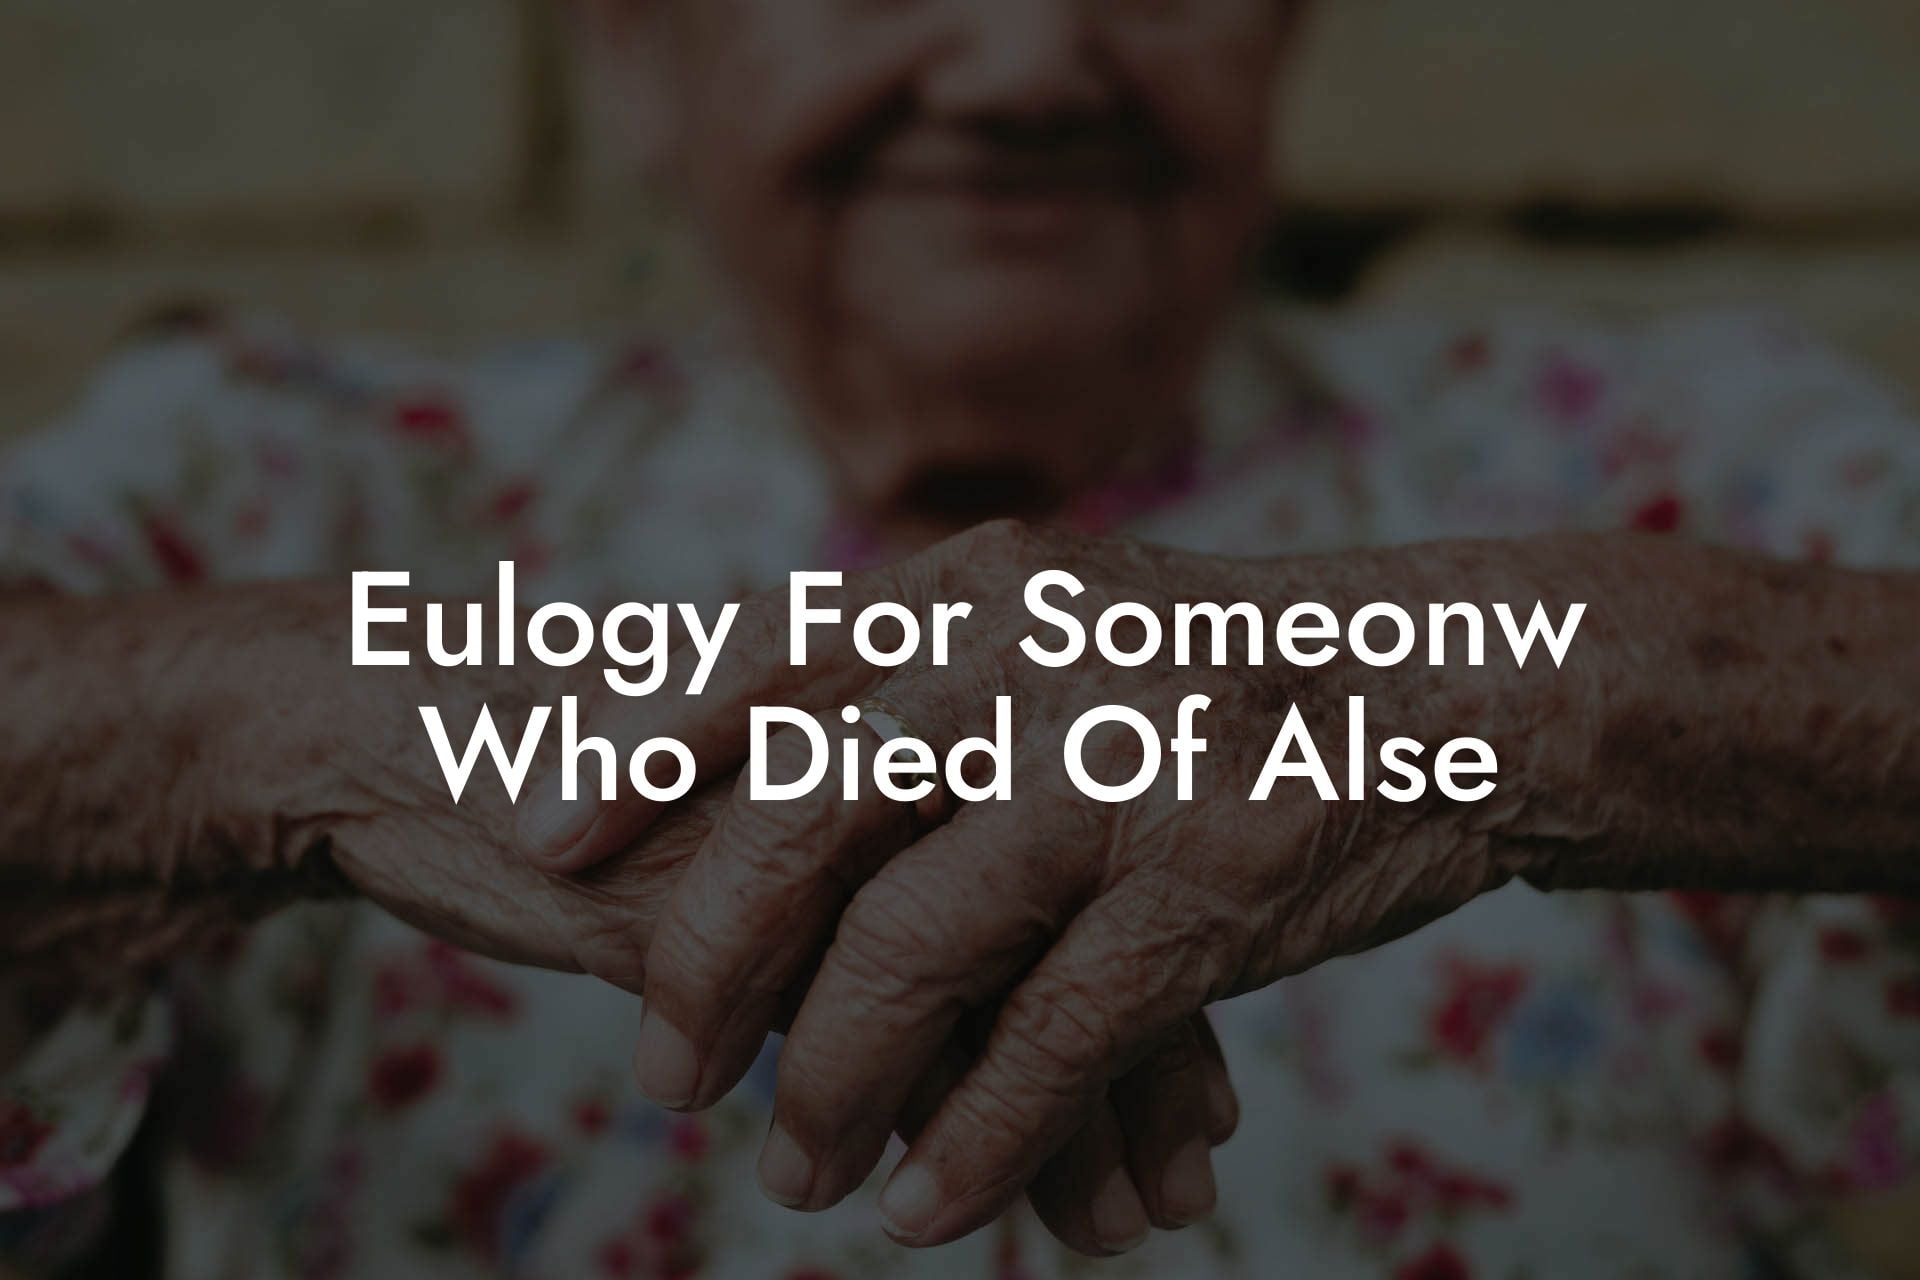 Eulogy For Someonw Who Died Of Alse